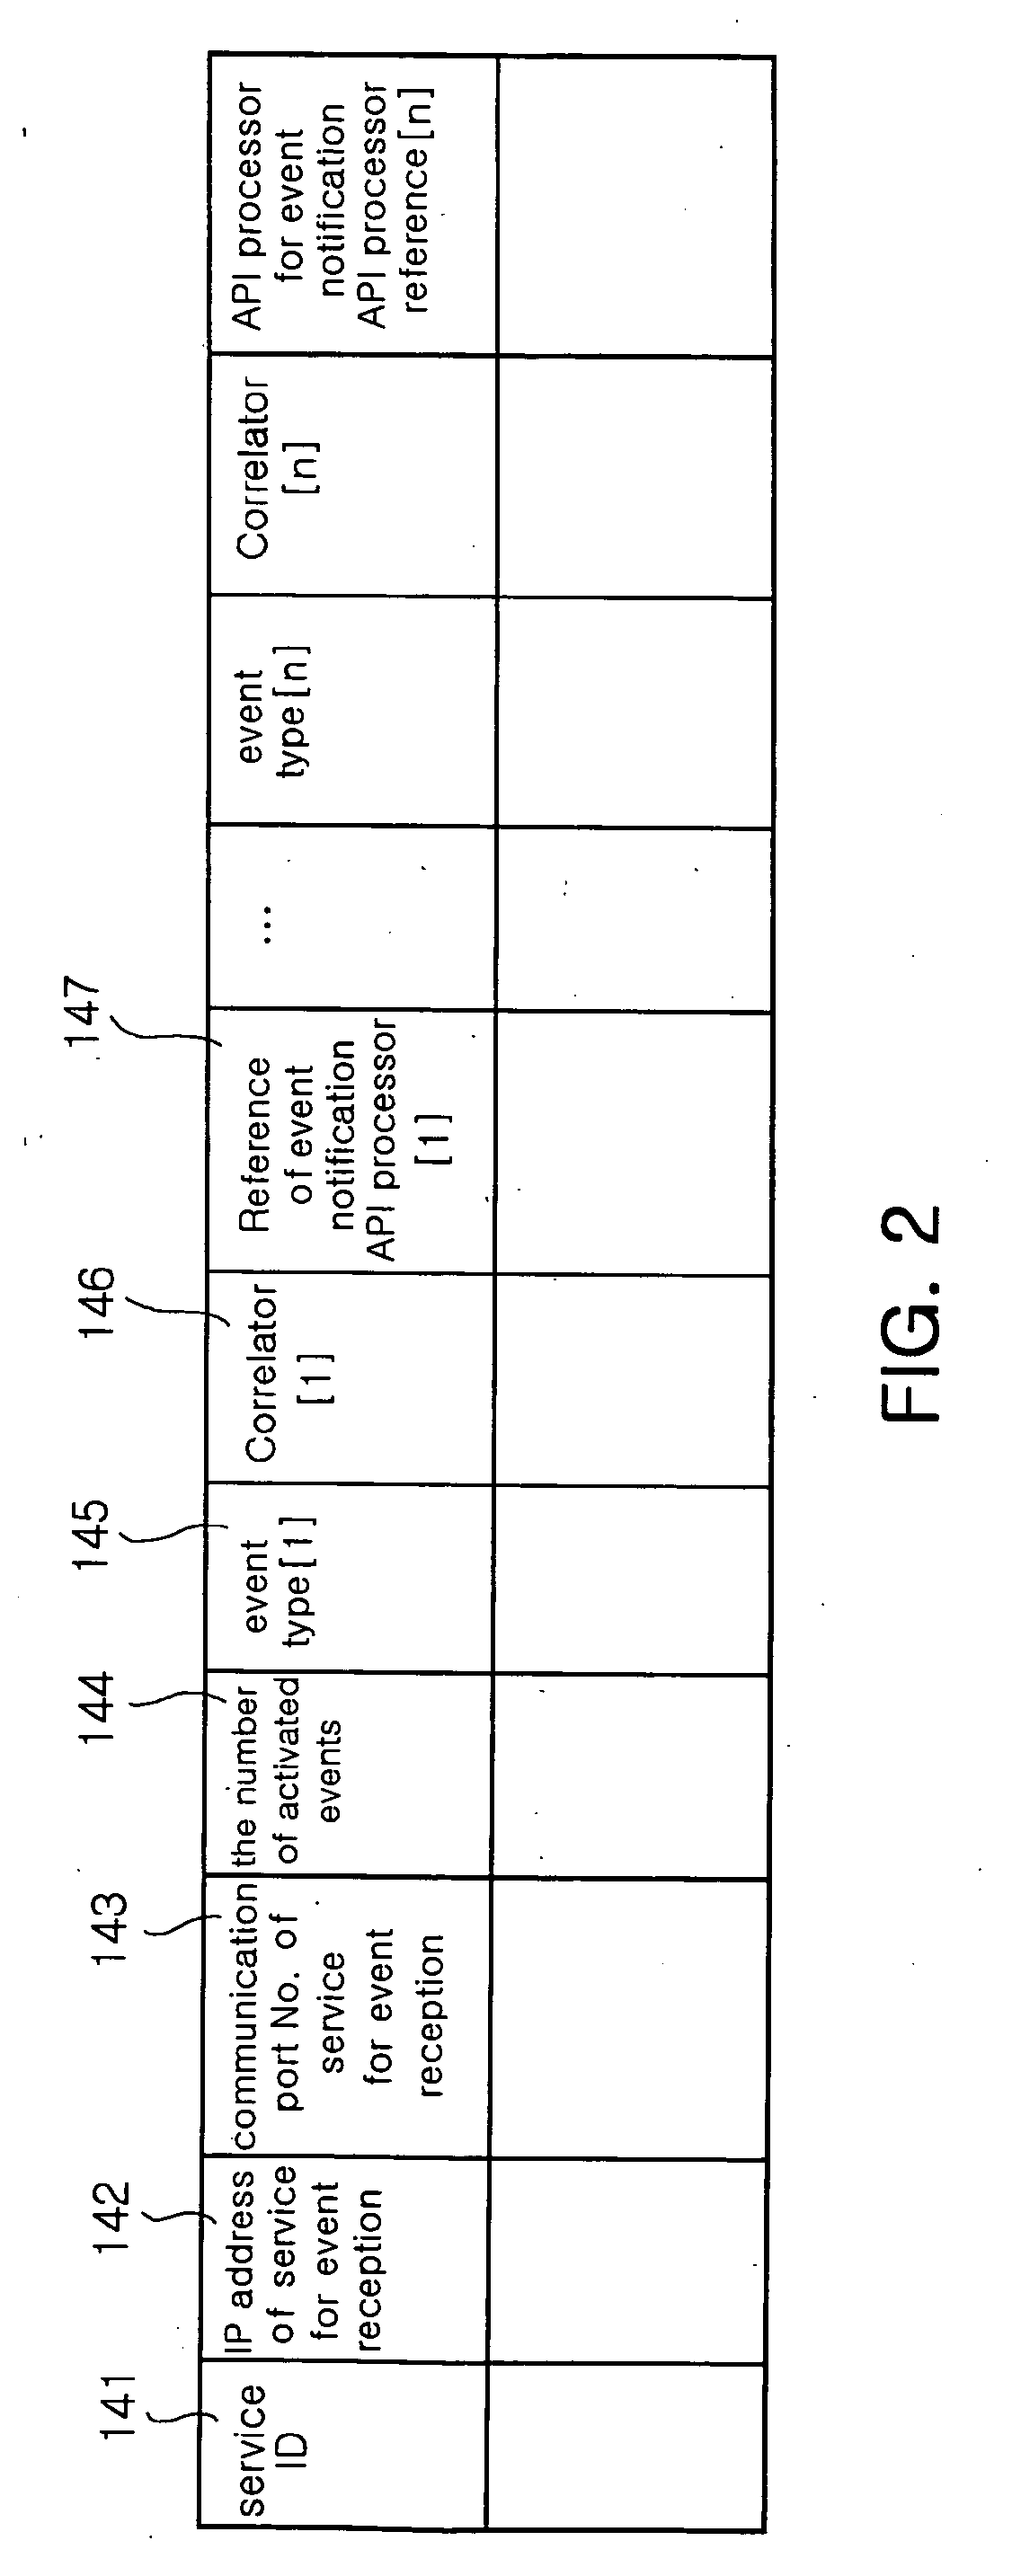 Apparatus and method for notifying communication network event in application server capable of supporting open API based on Web services